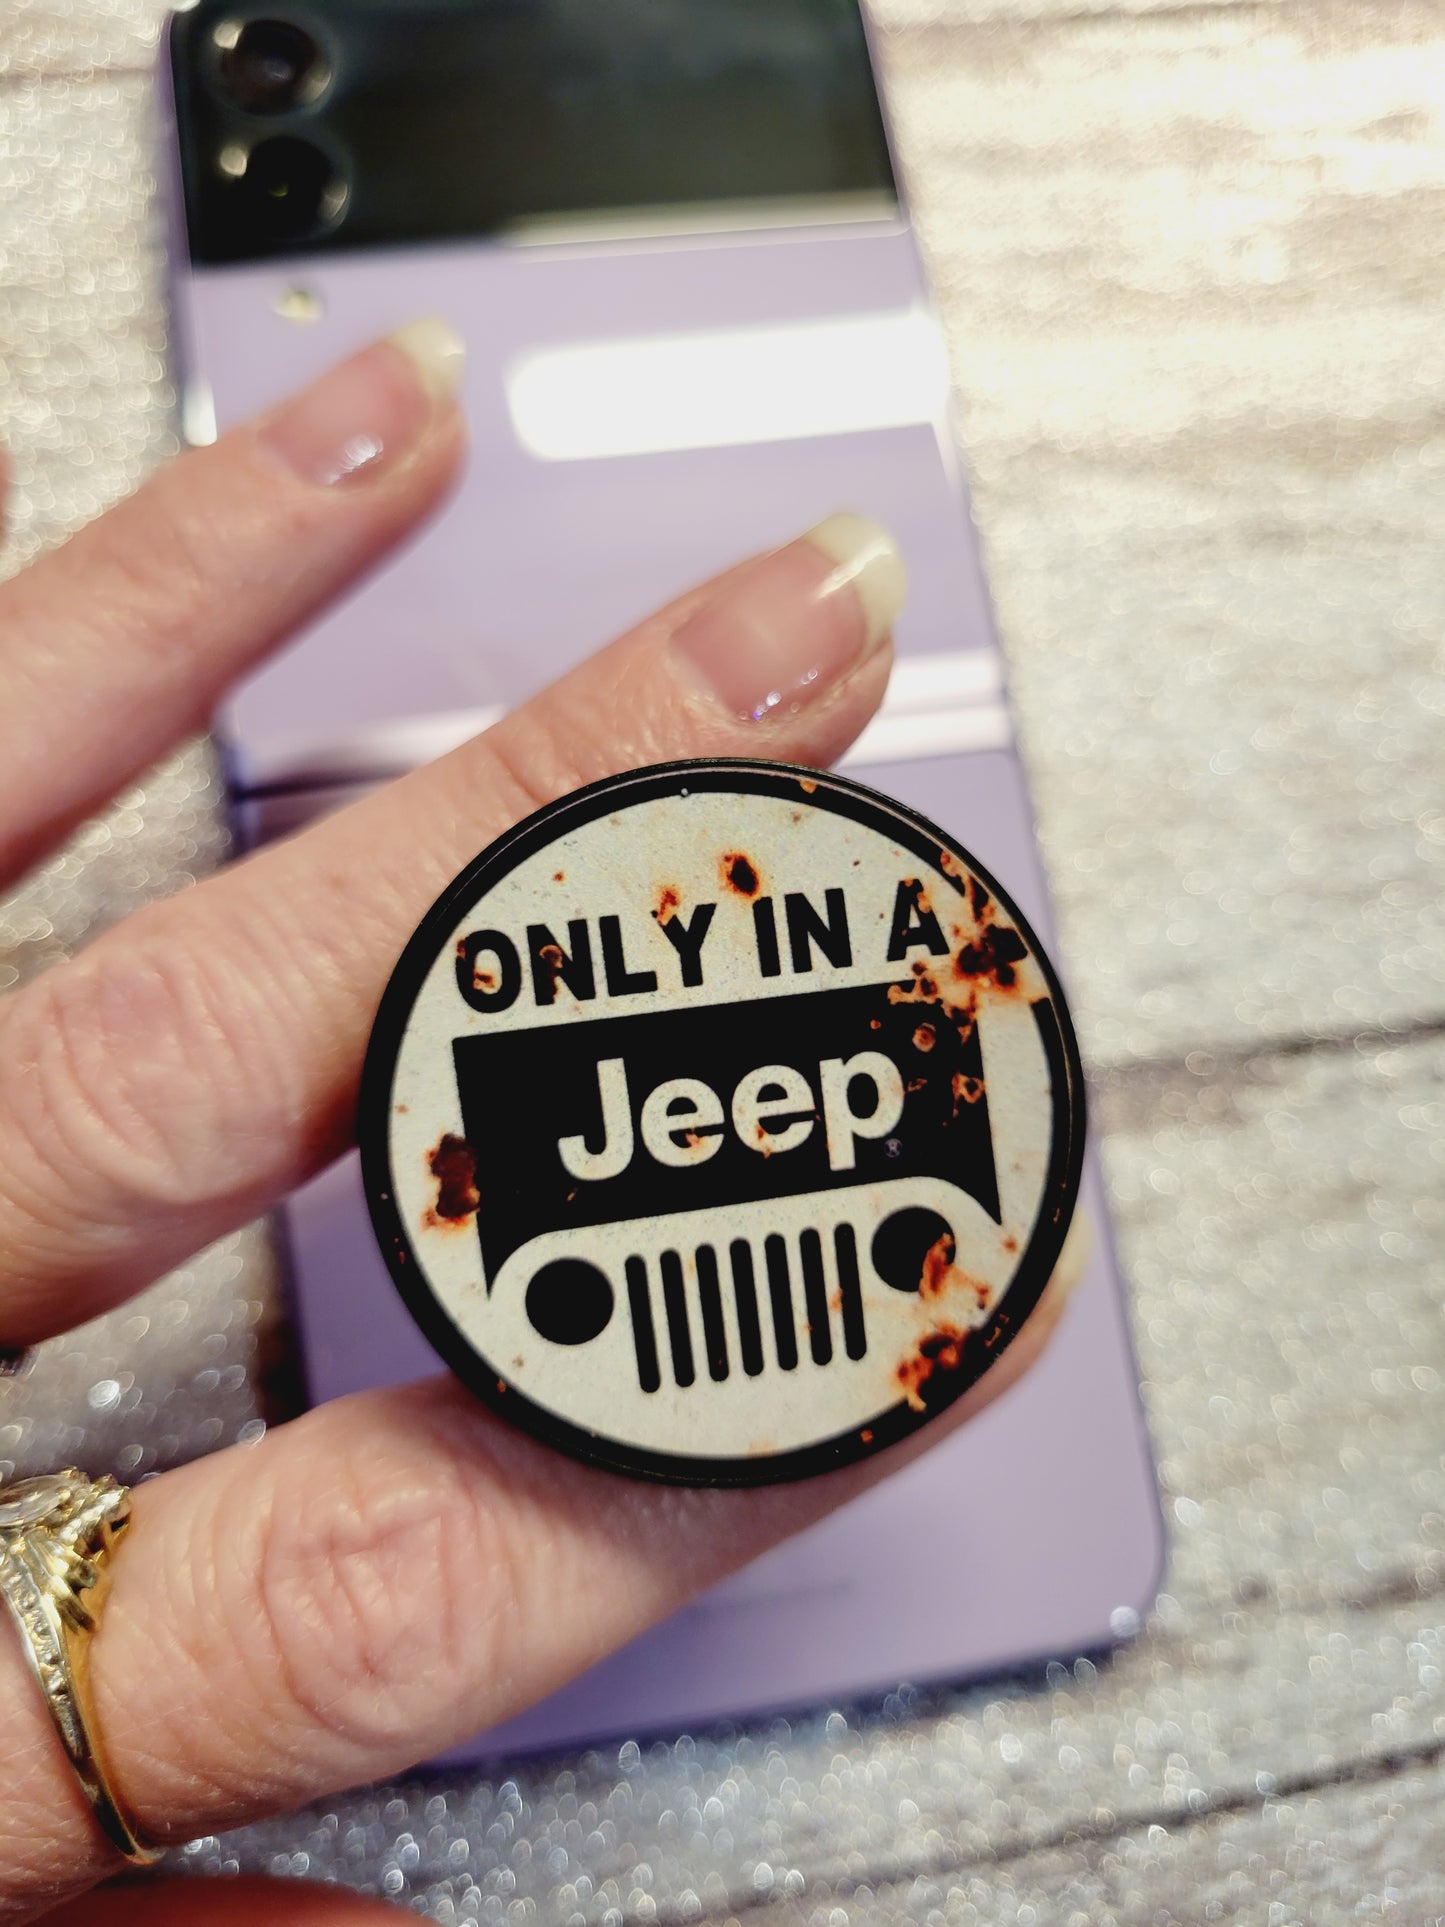 Only in a Jeep Phone Grip